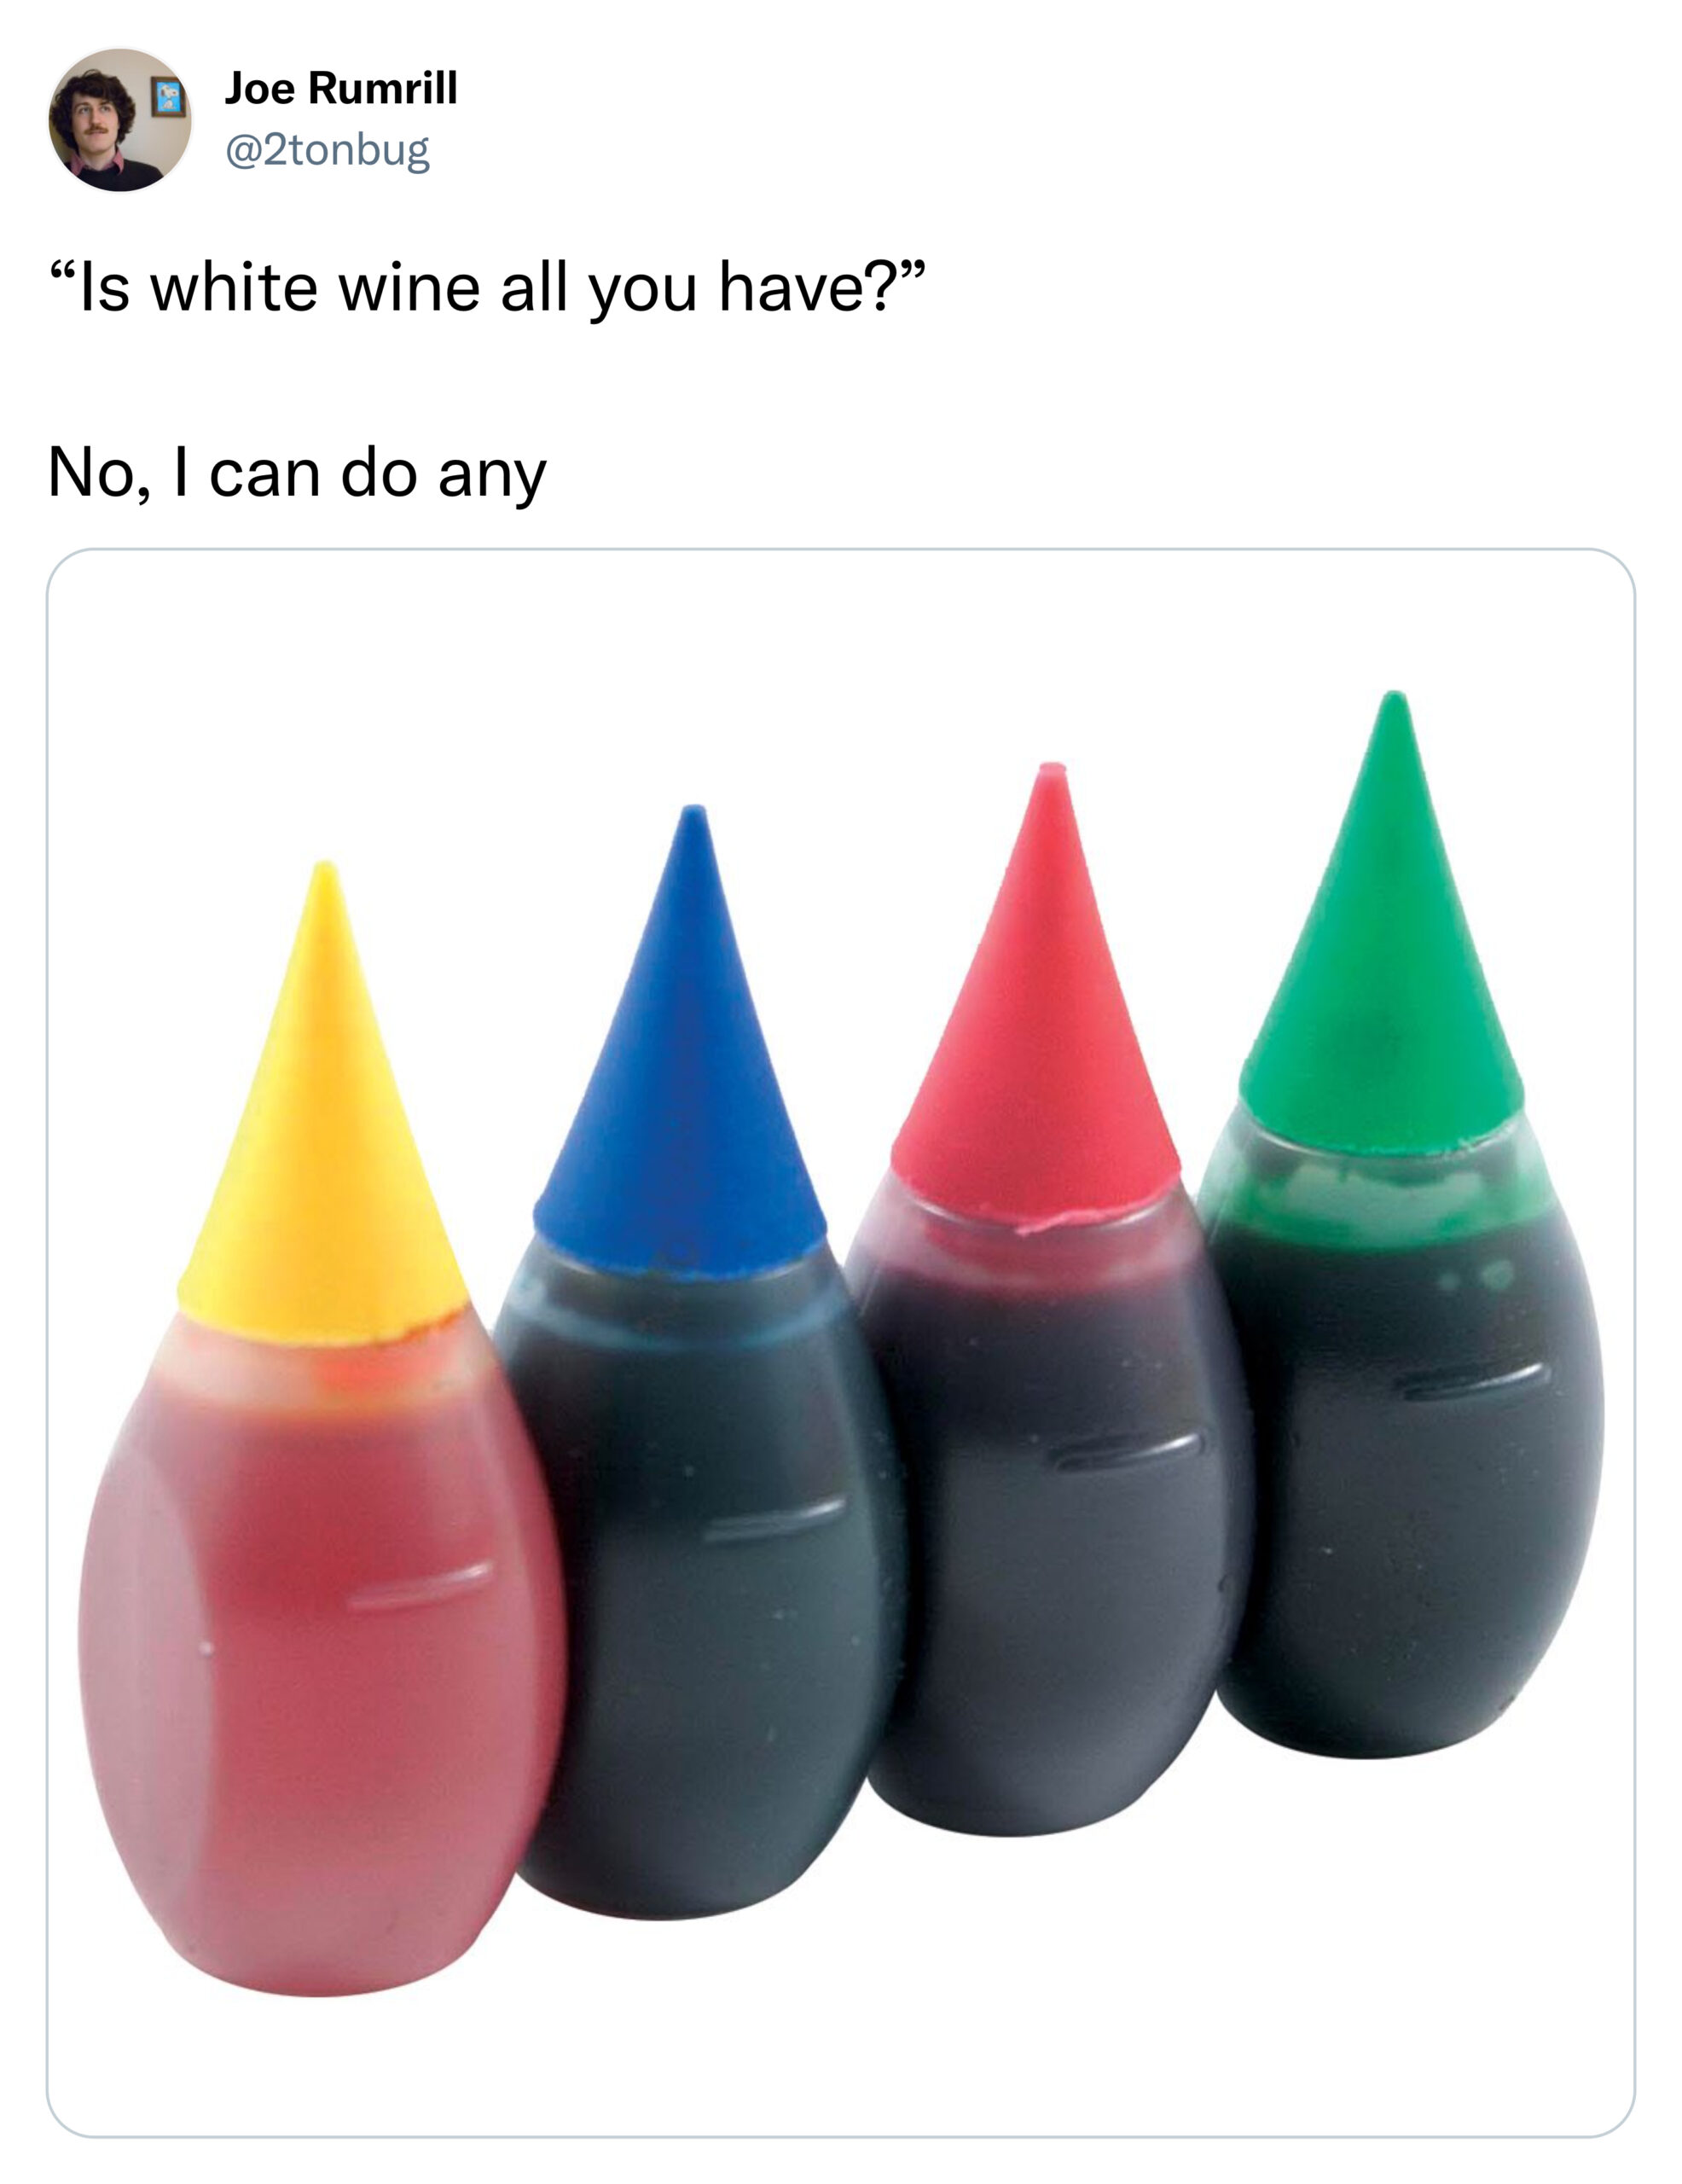 Monday Morning Randomness - food coloring jokes - Joe Rumrill "Is white wine all you have?" No, I can do any